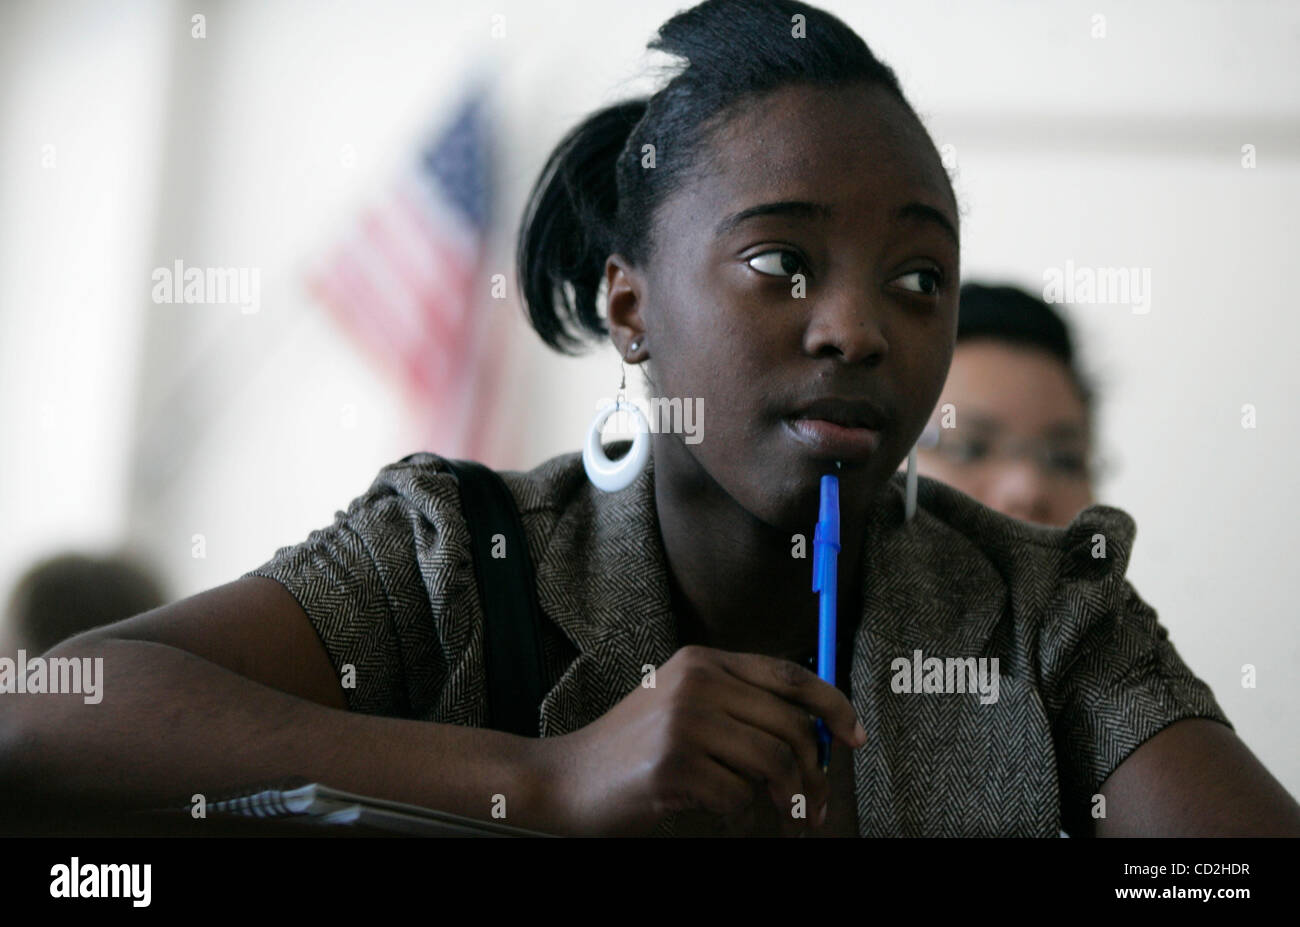 DAVID JOLES â€¢ djoles@startribune.com Robbinsdale, MN - March 6, 2008-] Porsha Brown  is a senior from Minneapolis attending Robbinsdale Cooper High via the Choice is Yours, a voluntary desegregation school program. Brown was in a geometry class. (Credit Image: © David Joles /Star Tribune/ZUMA Pres Stock Photo